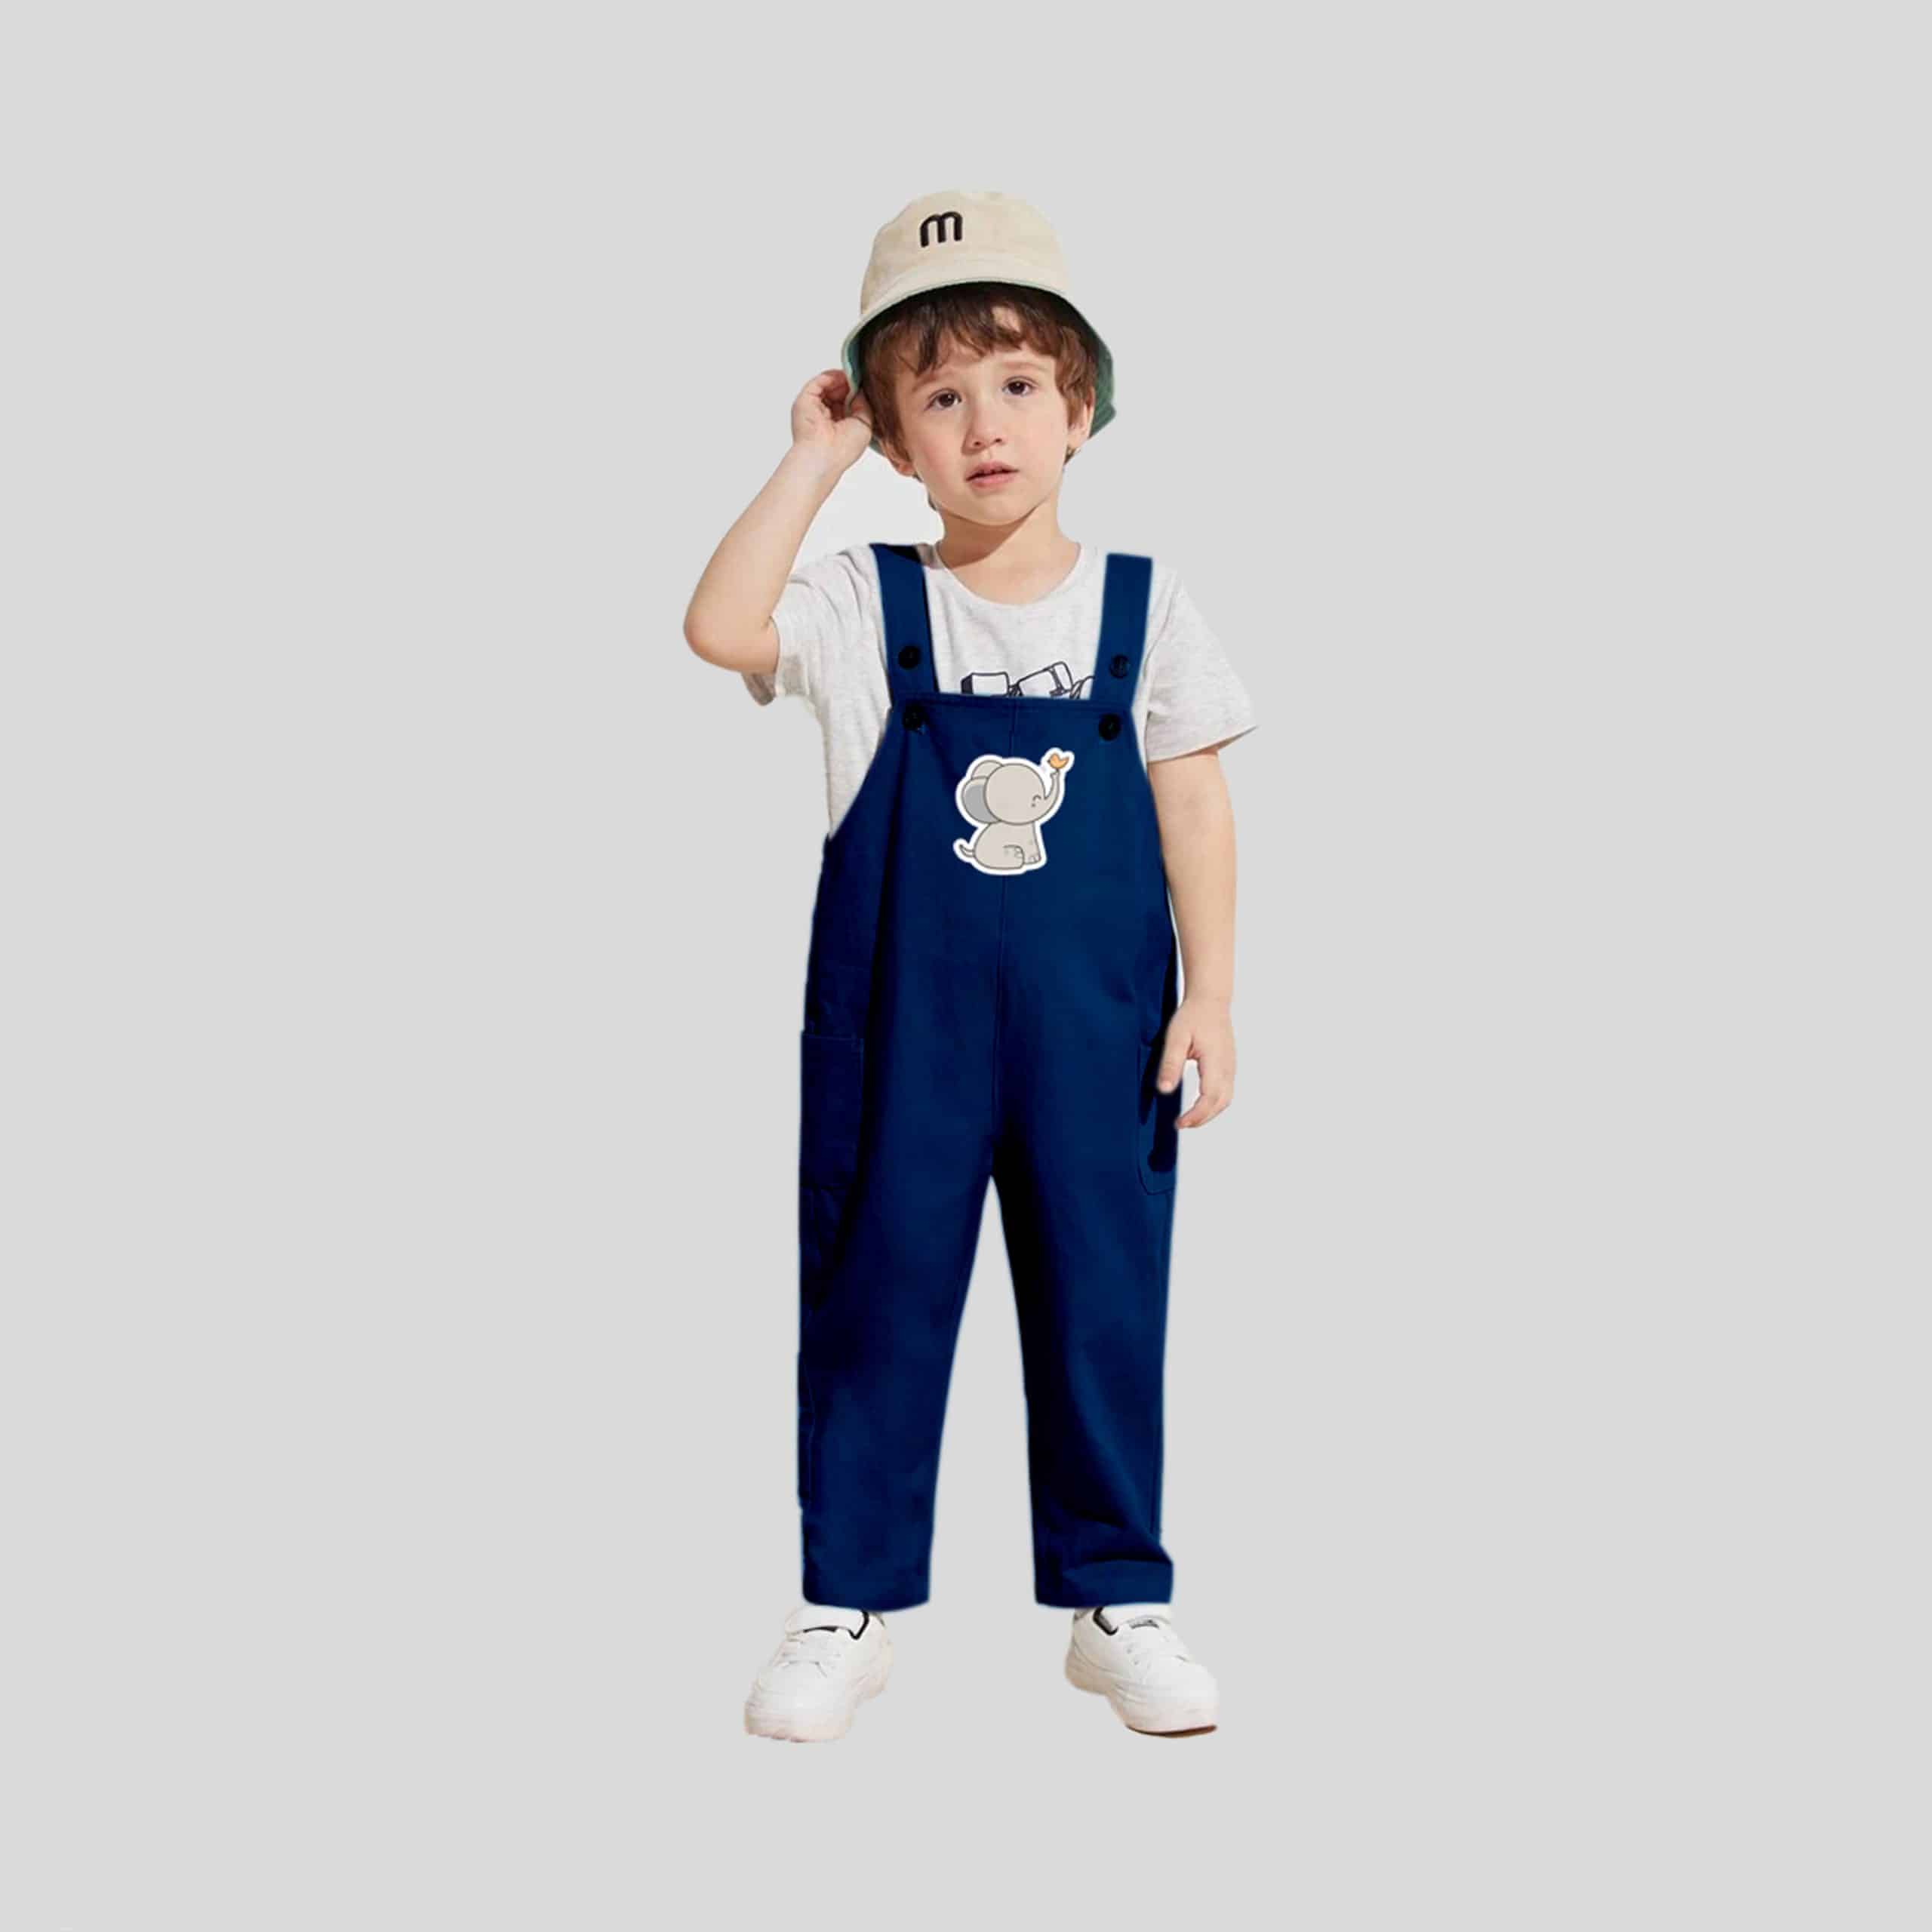 Boys Navy Blue Dungarees with Cute Elephant Print Details, Stylish and Comfortable-RKFCW184